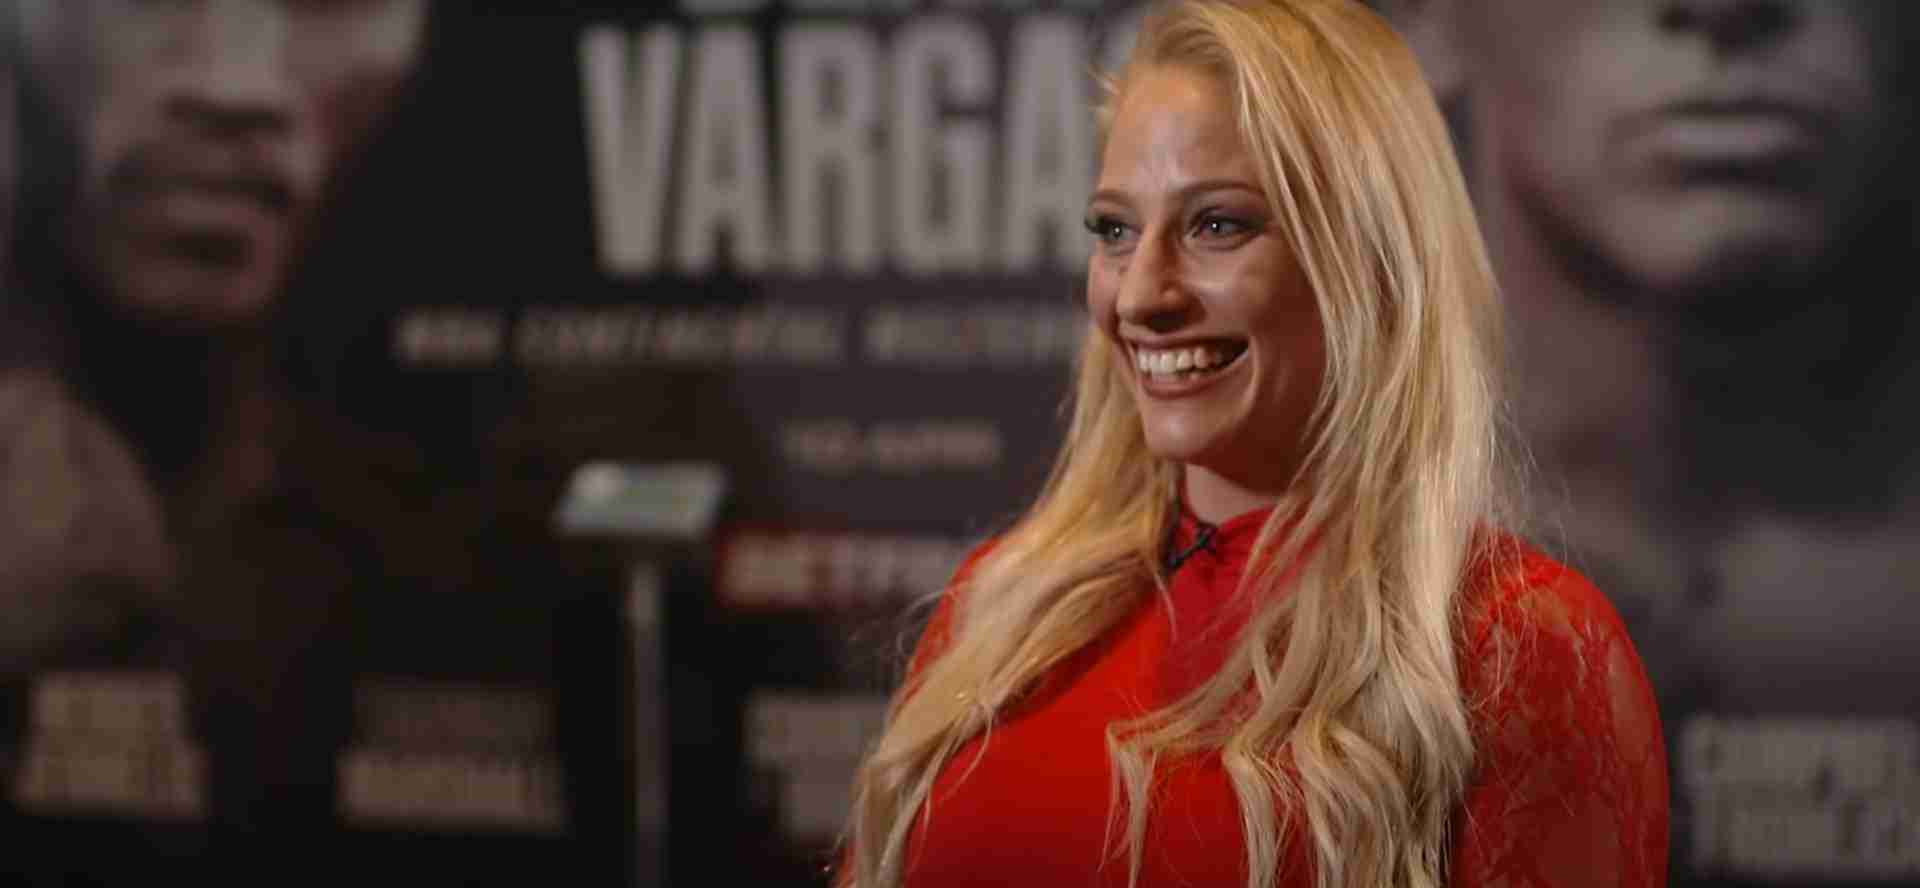 Blonde Bombshell Reacts To Fight Of The Year Brawl